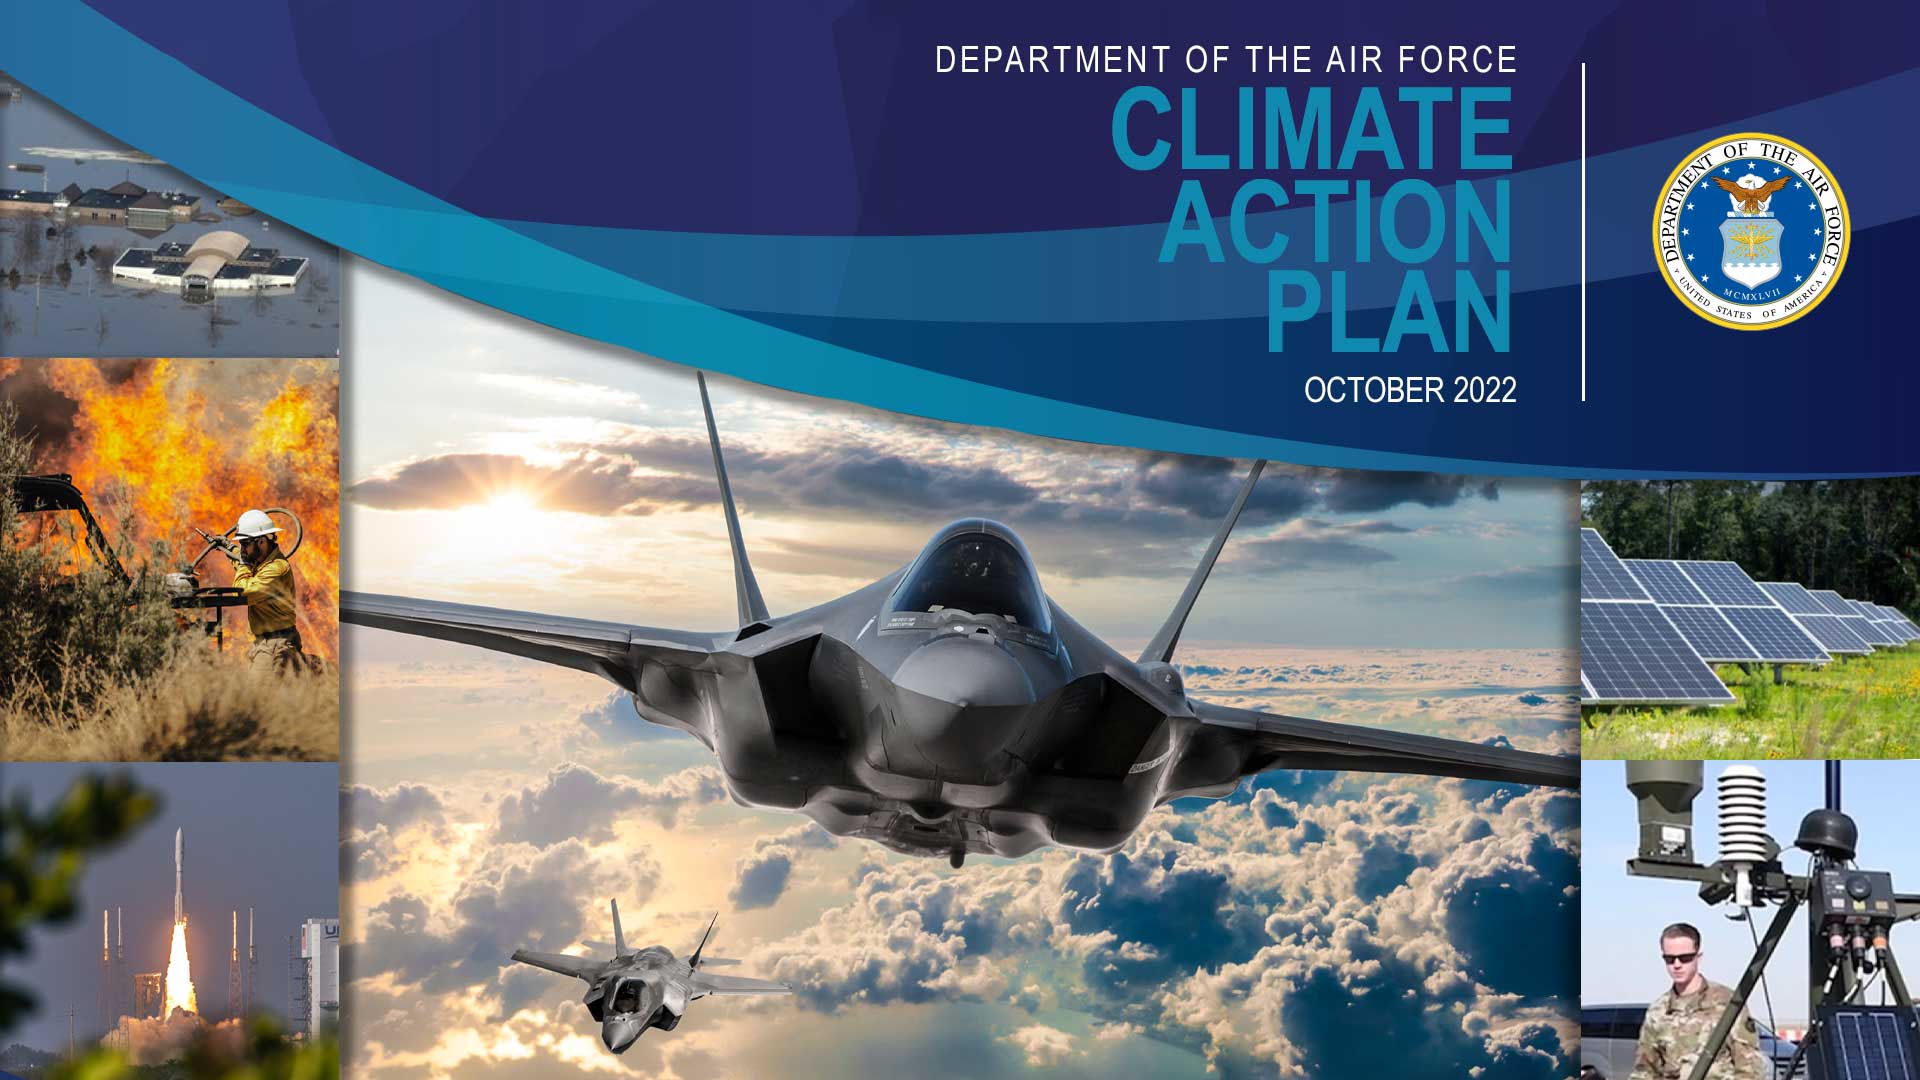 Department of the Air Force rolls out plan addressing climate change